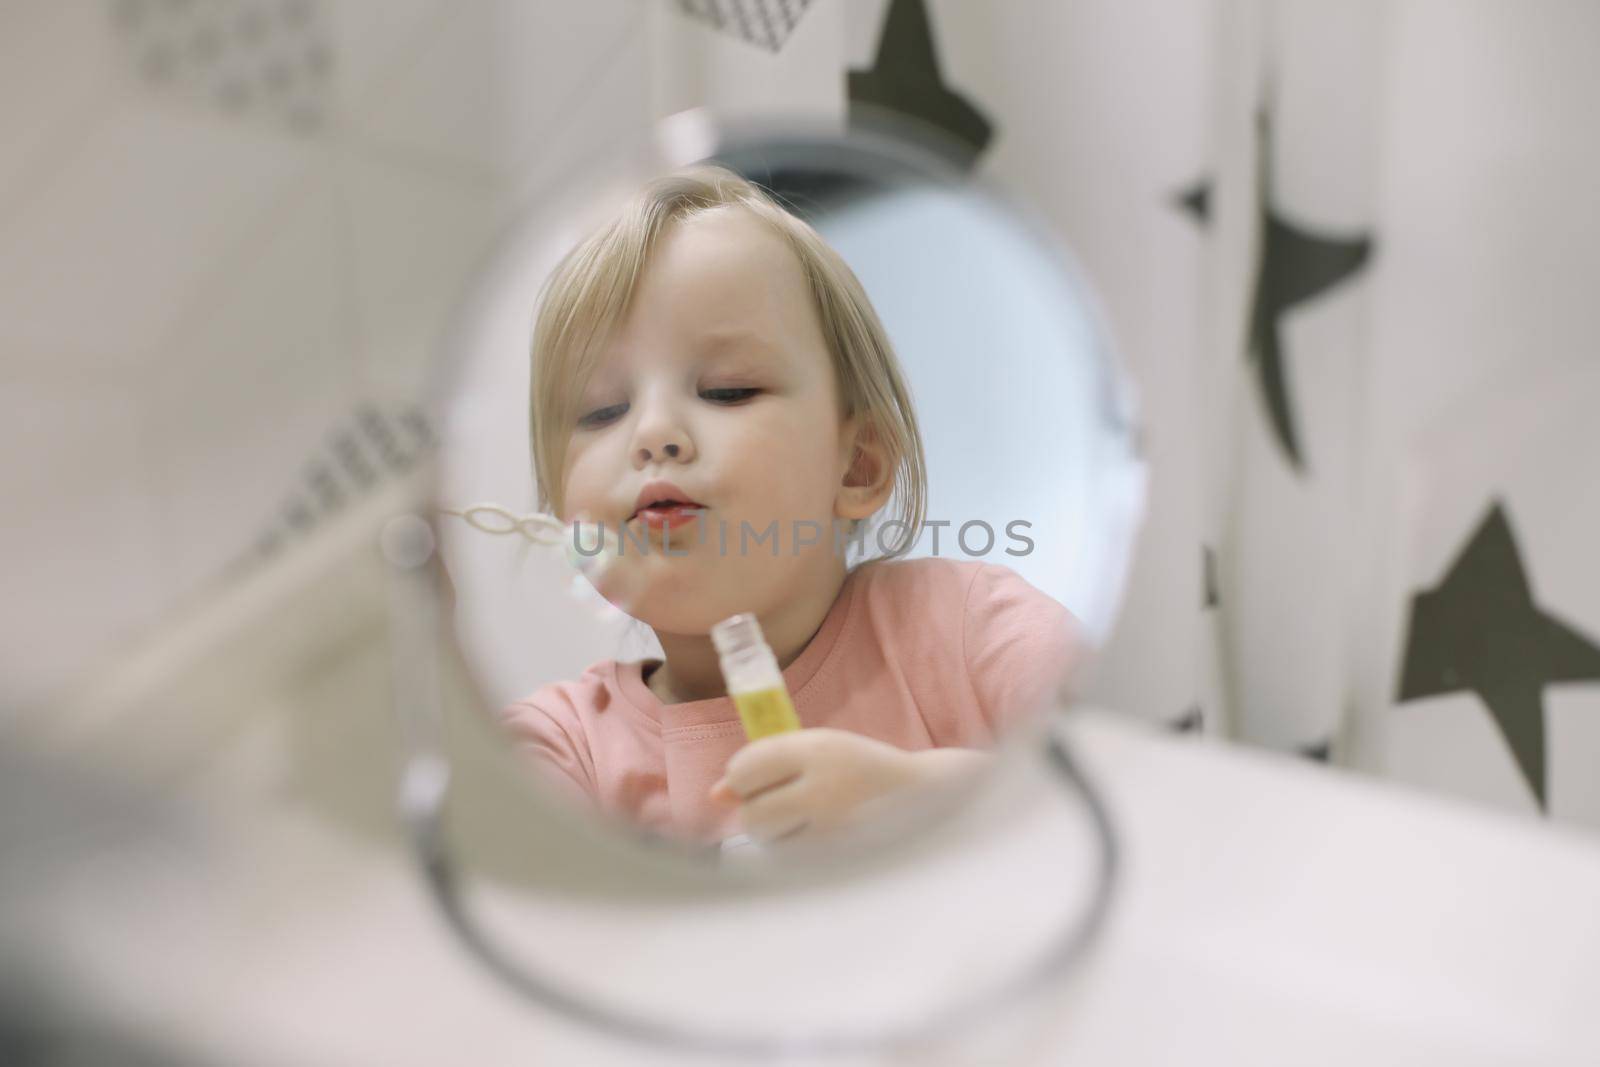 portrait of a cute baby girl playing with water and soap bubbles in a bath sink at home by paralisart